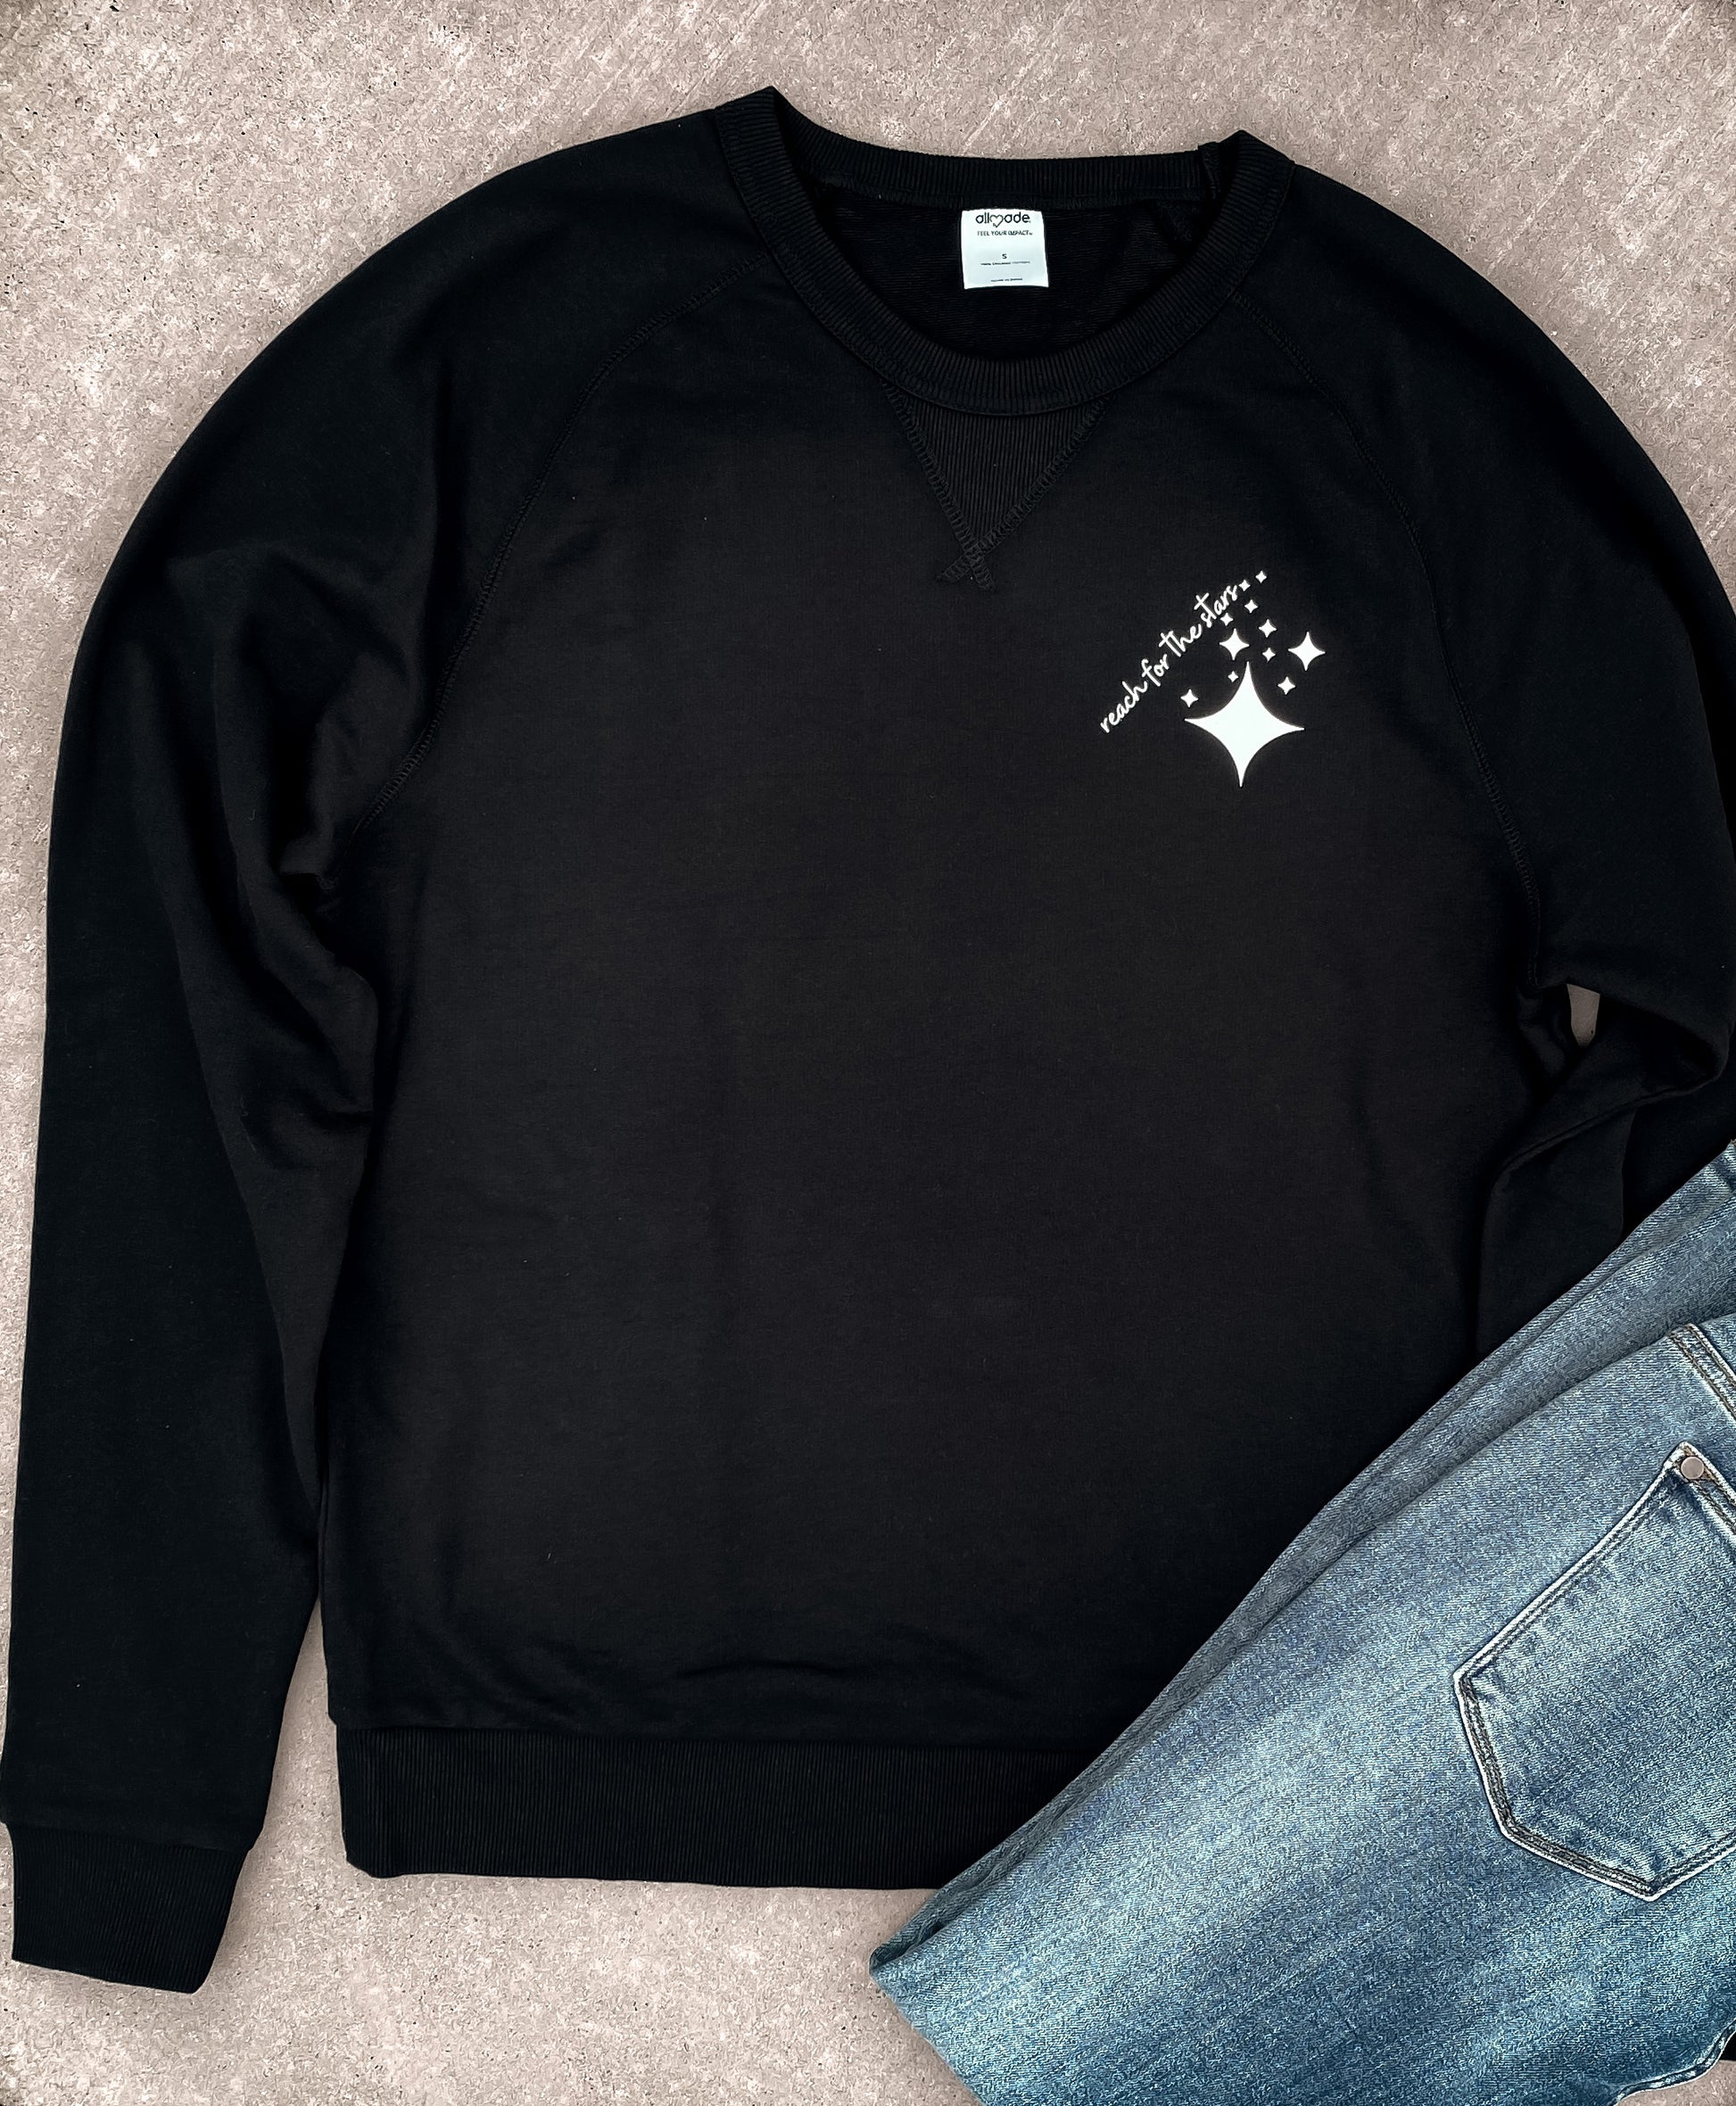 Black Organic French Terry Sweatshirt with Reach for the Stars screen printed on the upper left hand side of the sweatshirt surrounded by white mid-century stars